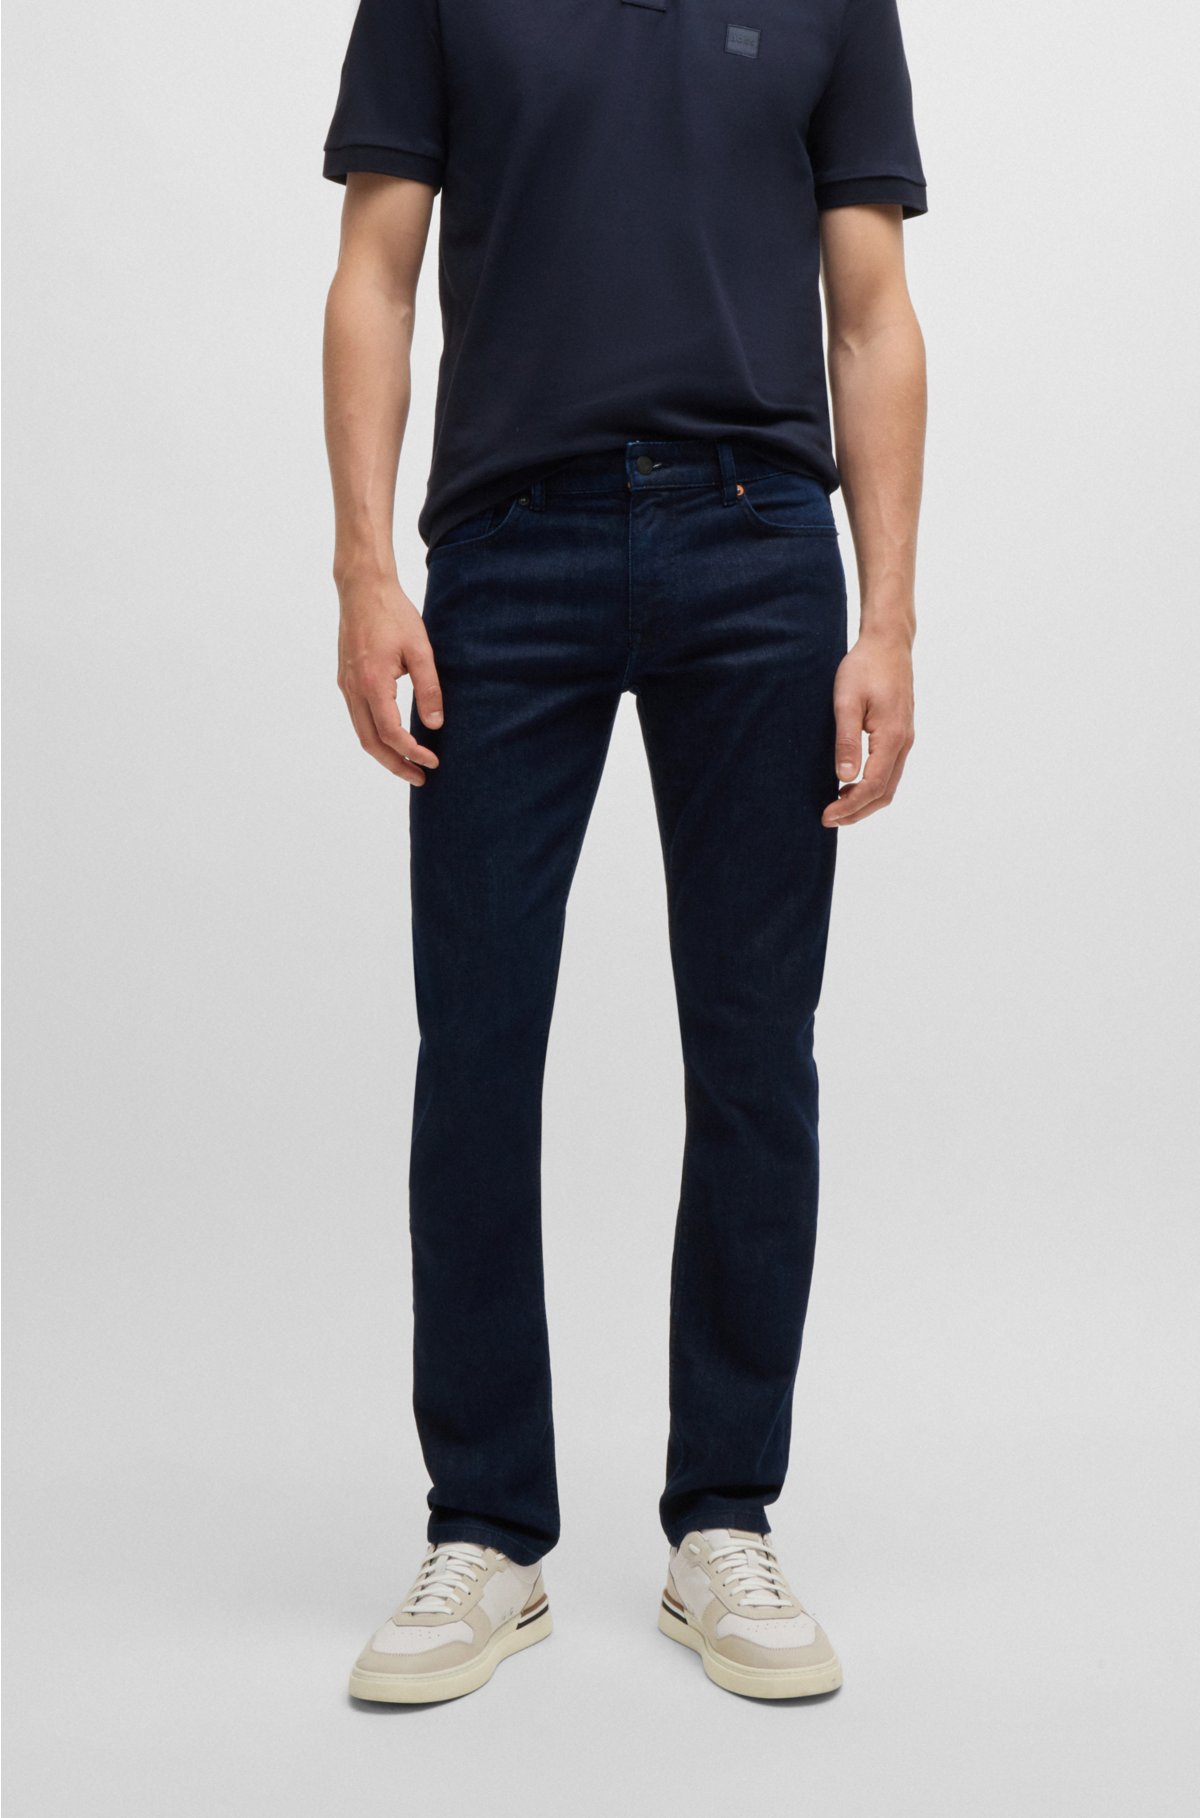 Men's Skinny Jeans: Comfortable & Stretch Fit